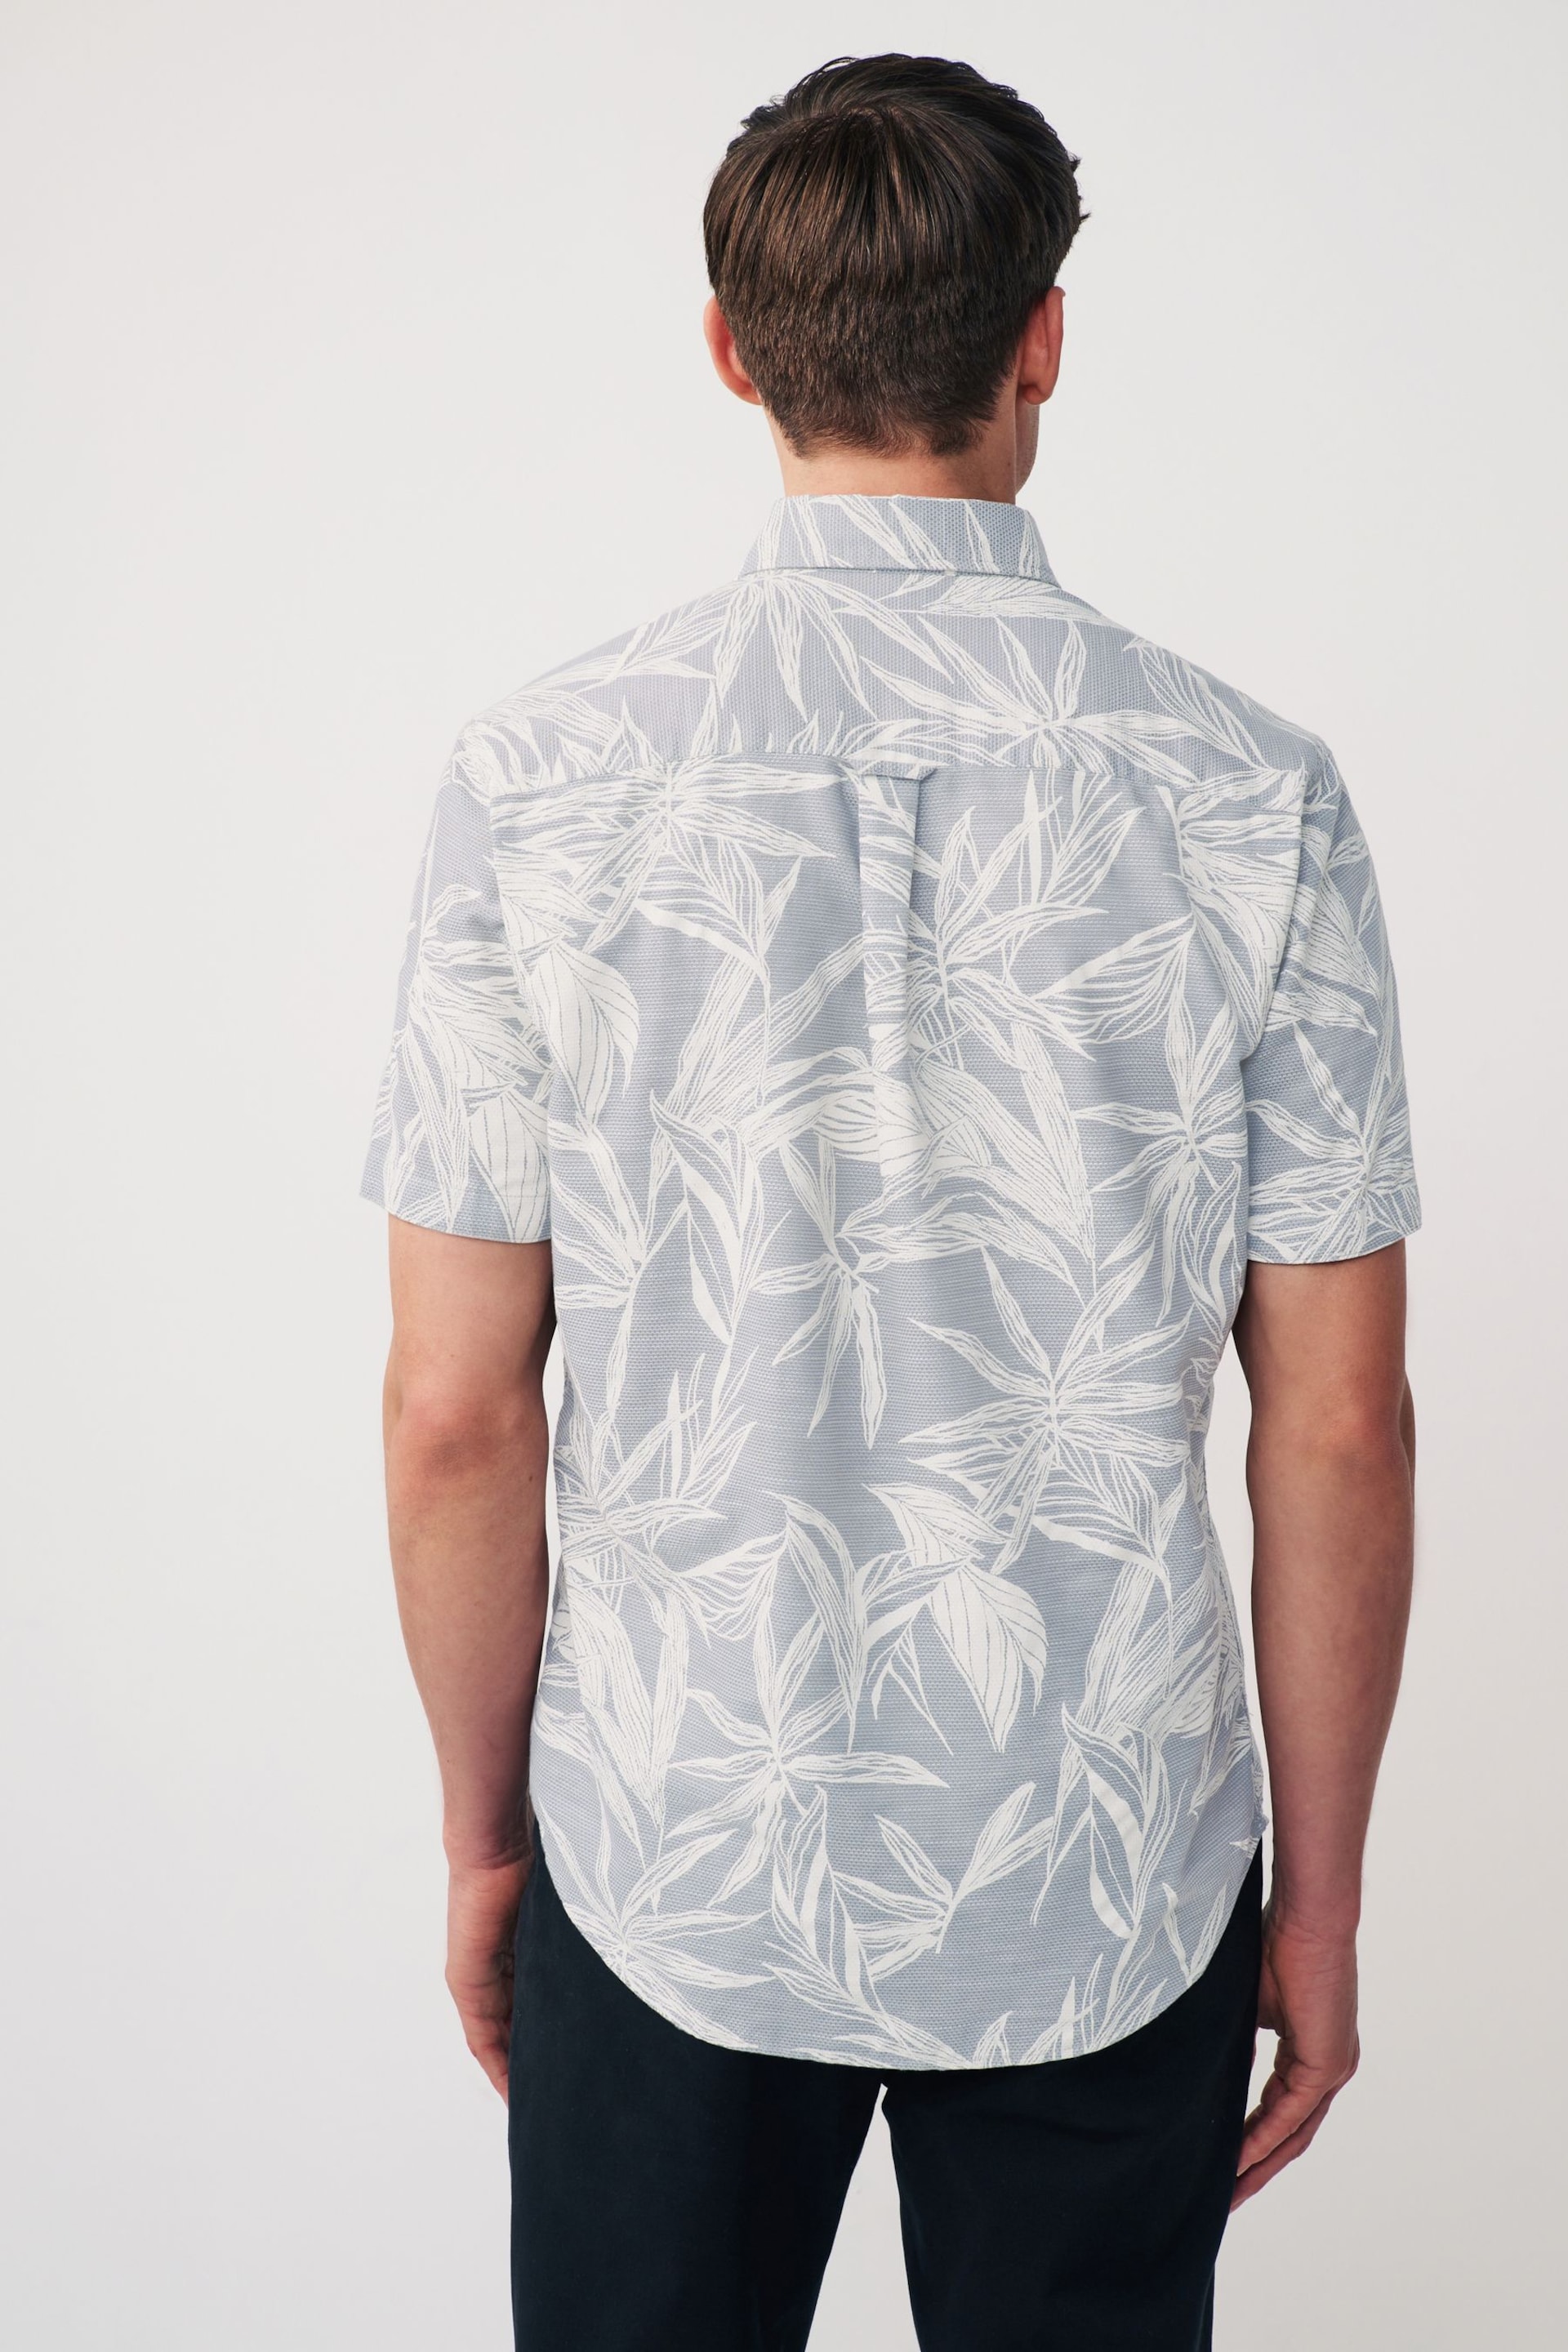 Grey Textured Floral Short Sleeve Shirt - Image 3 of 7